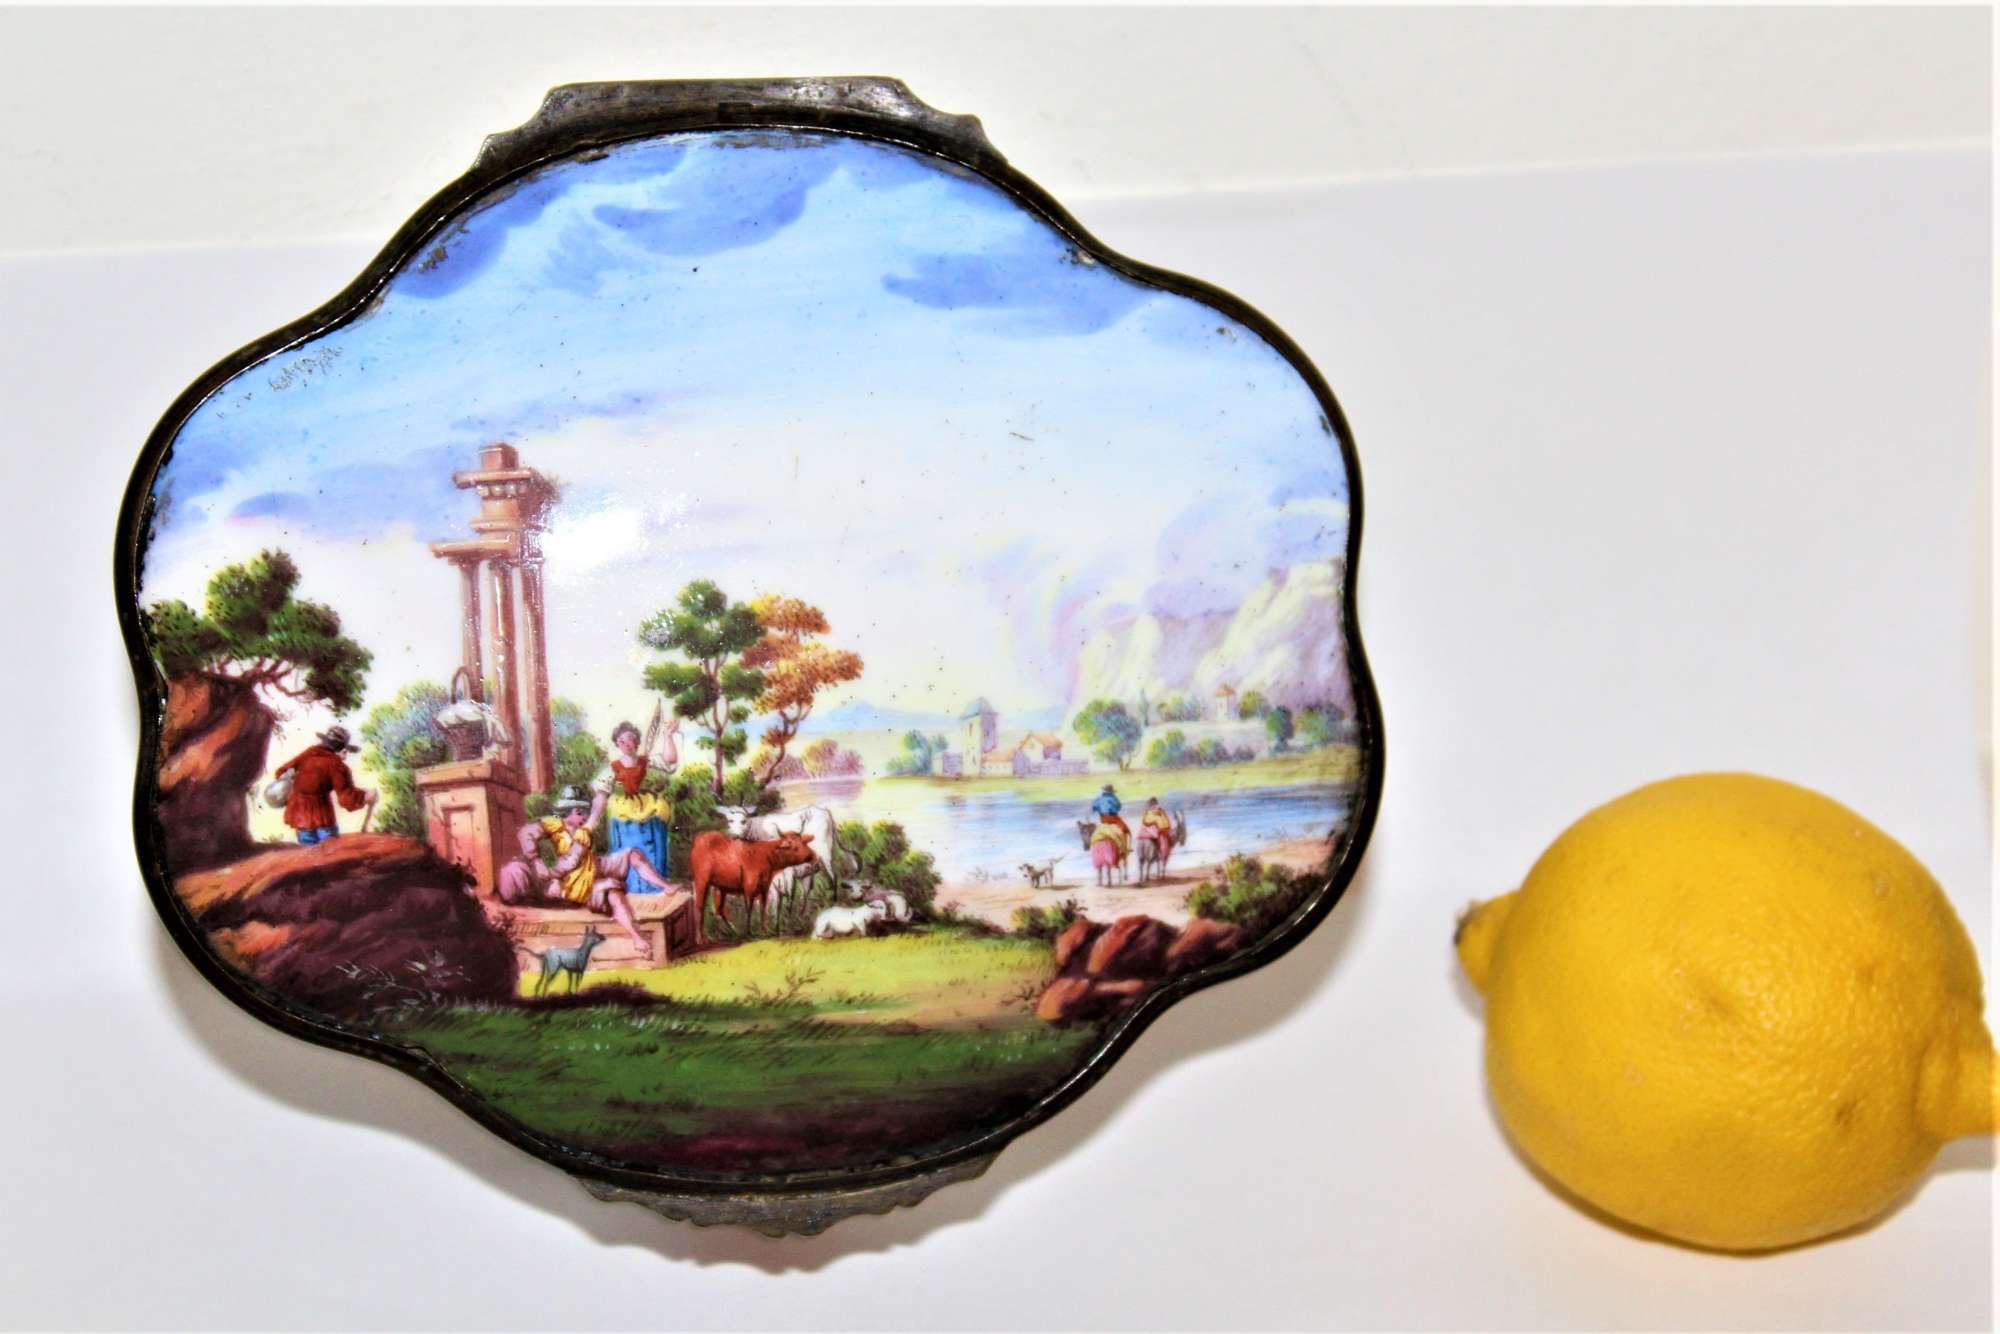 A Large 18th/19th Century Oval Shaped Bilston Enamel Box Well Painted